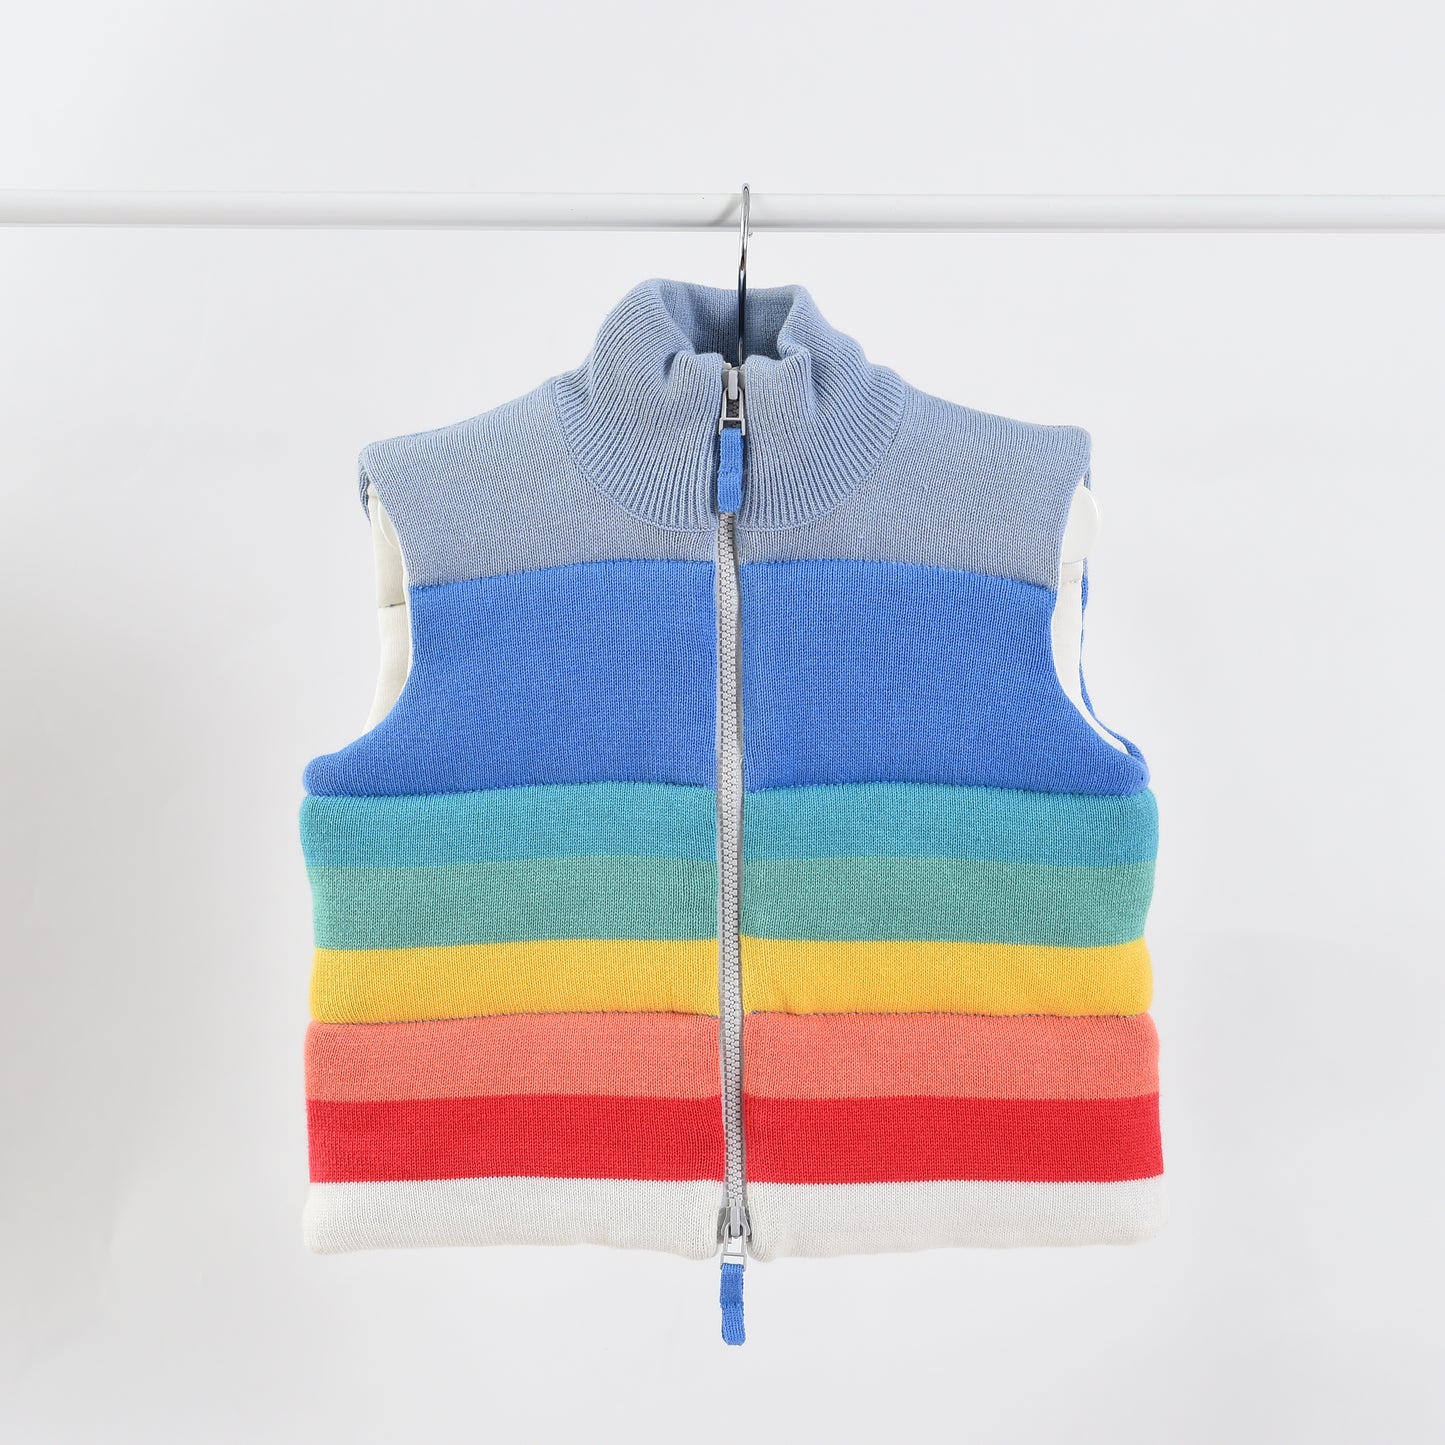 GILET - BABY - 3 COLOR (BLUE/PINK/GREY) - BBA15 005